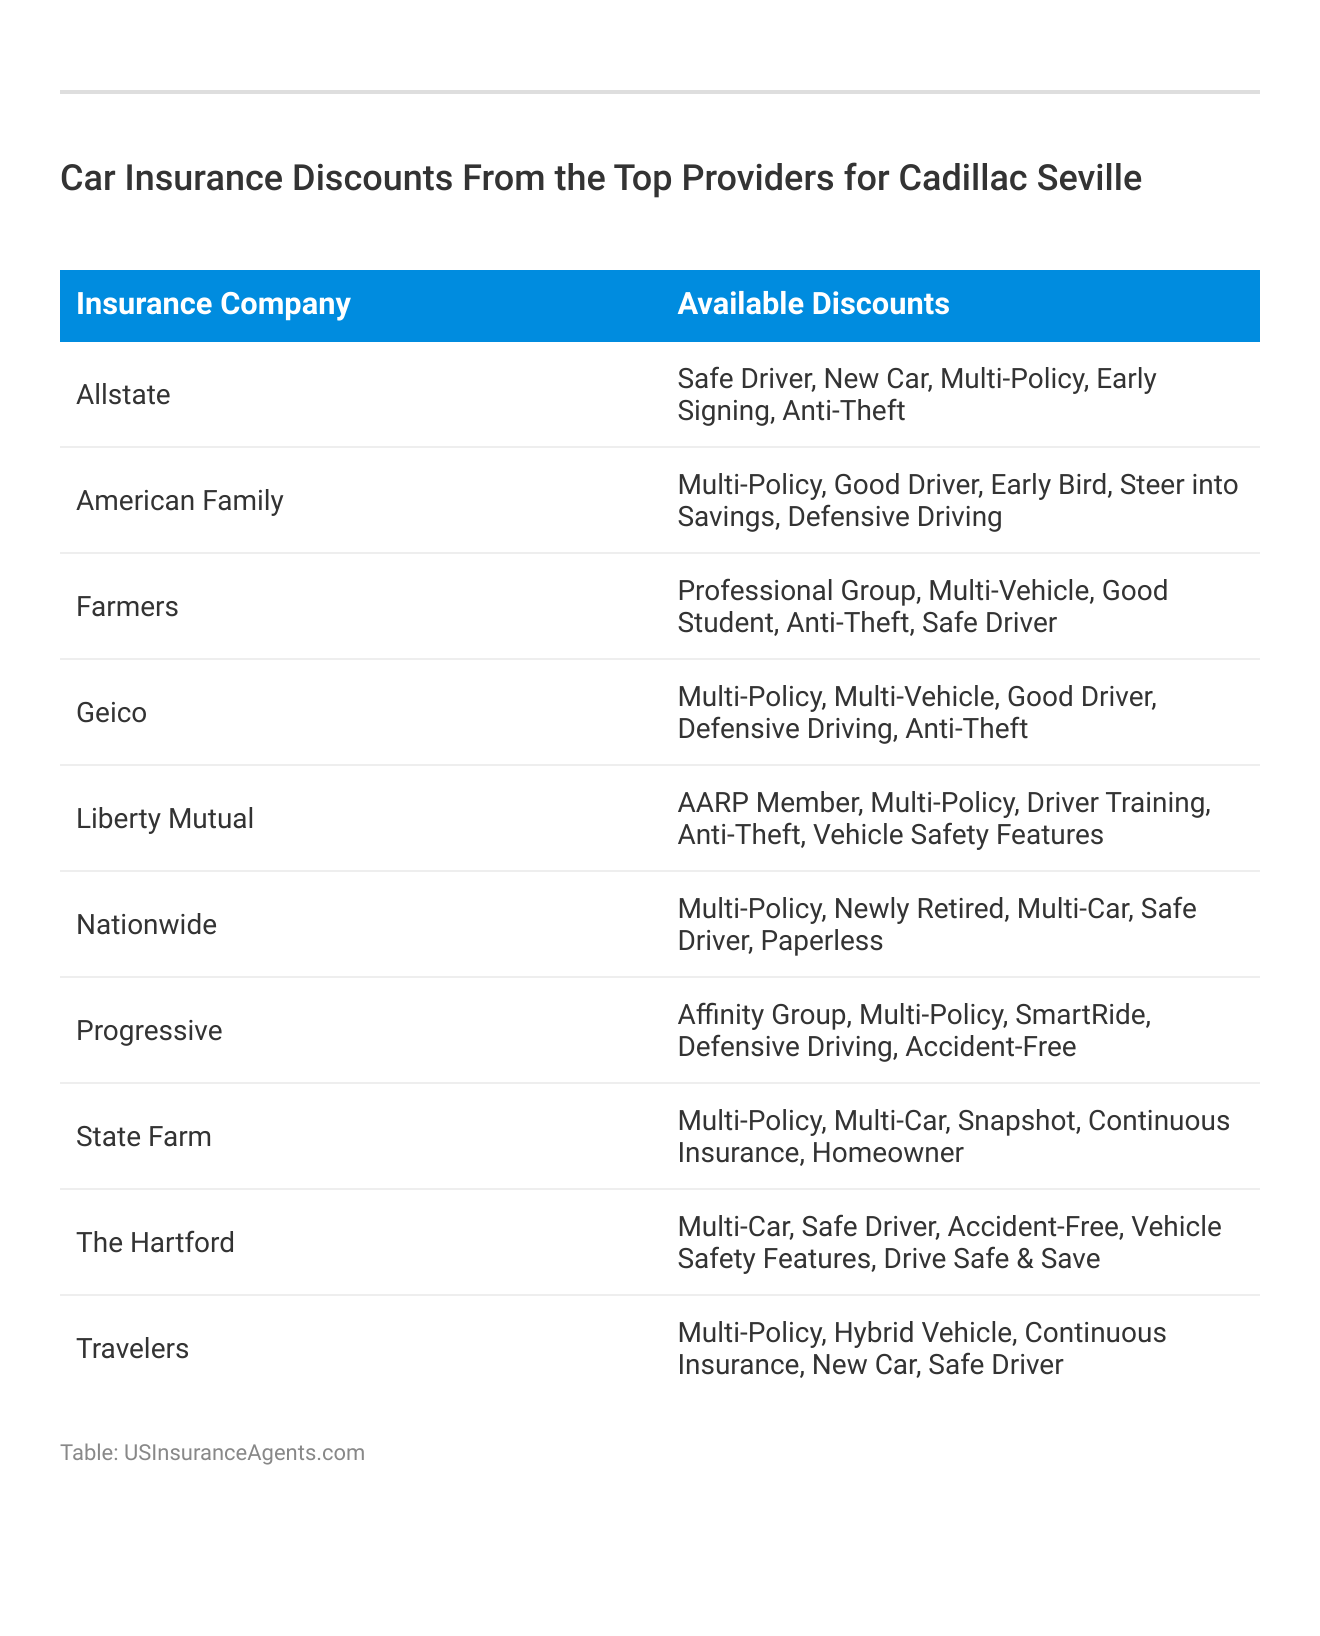 <h3>Car Insurance Discounts From the Top Providers for Cadillac Seville</h3>